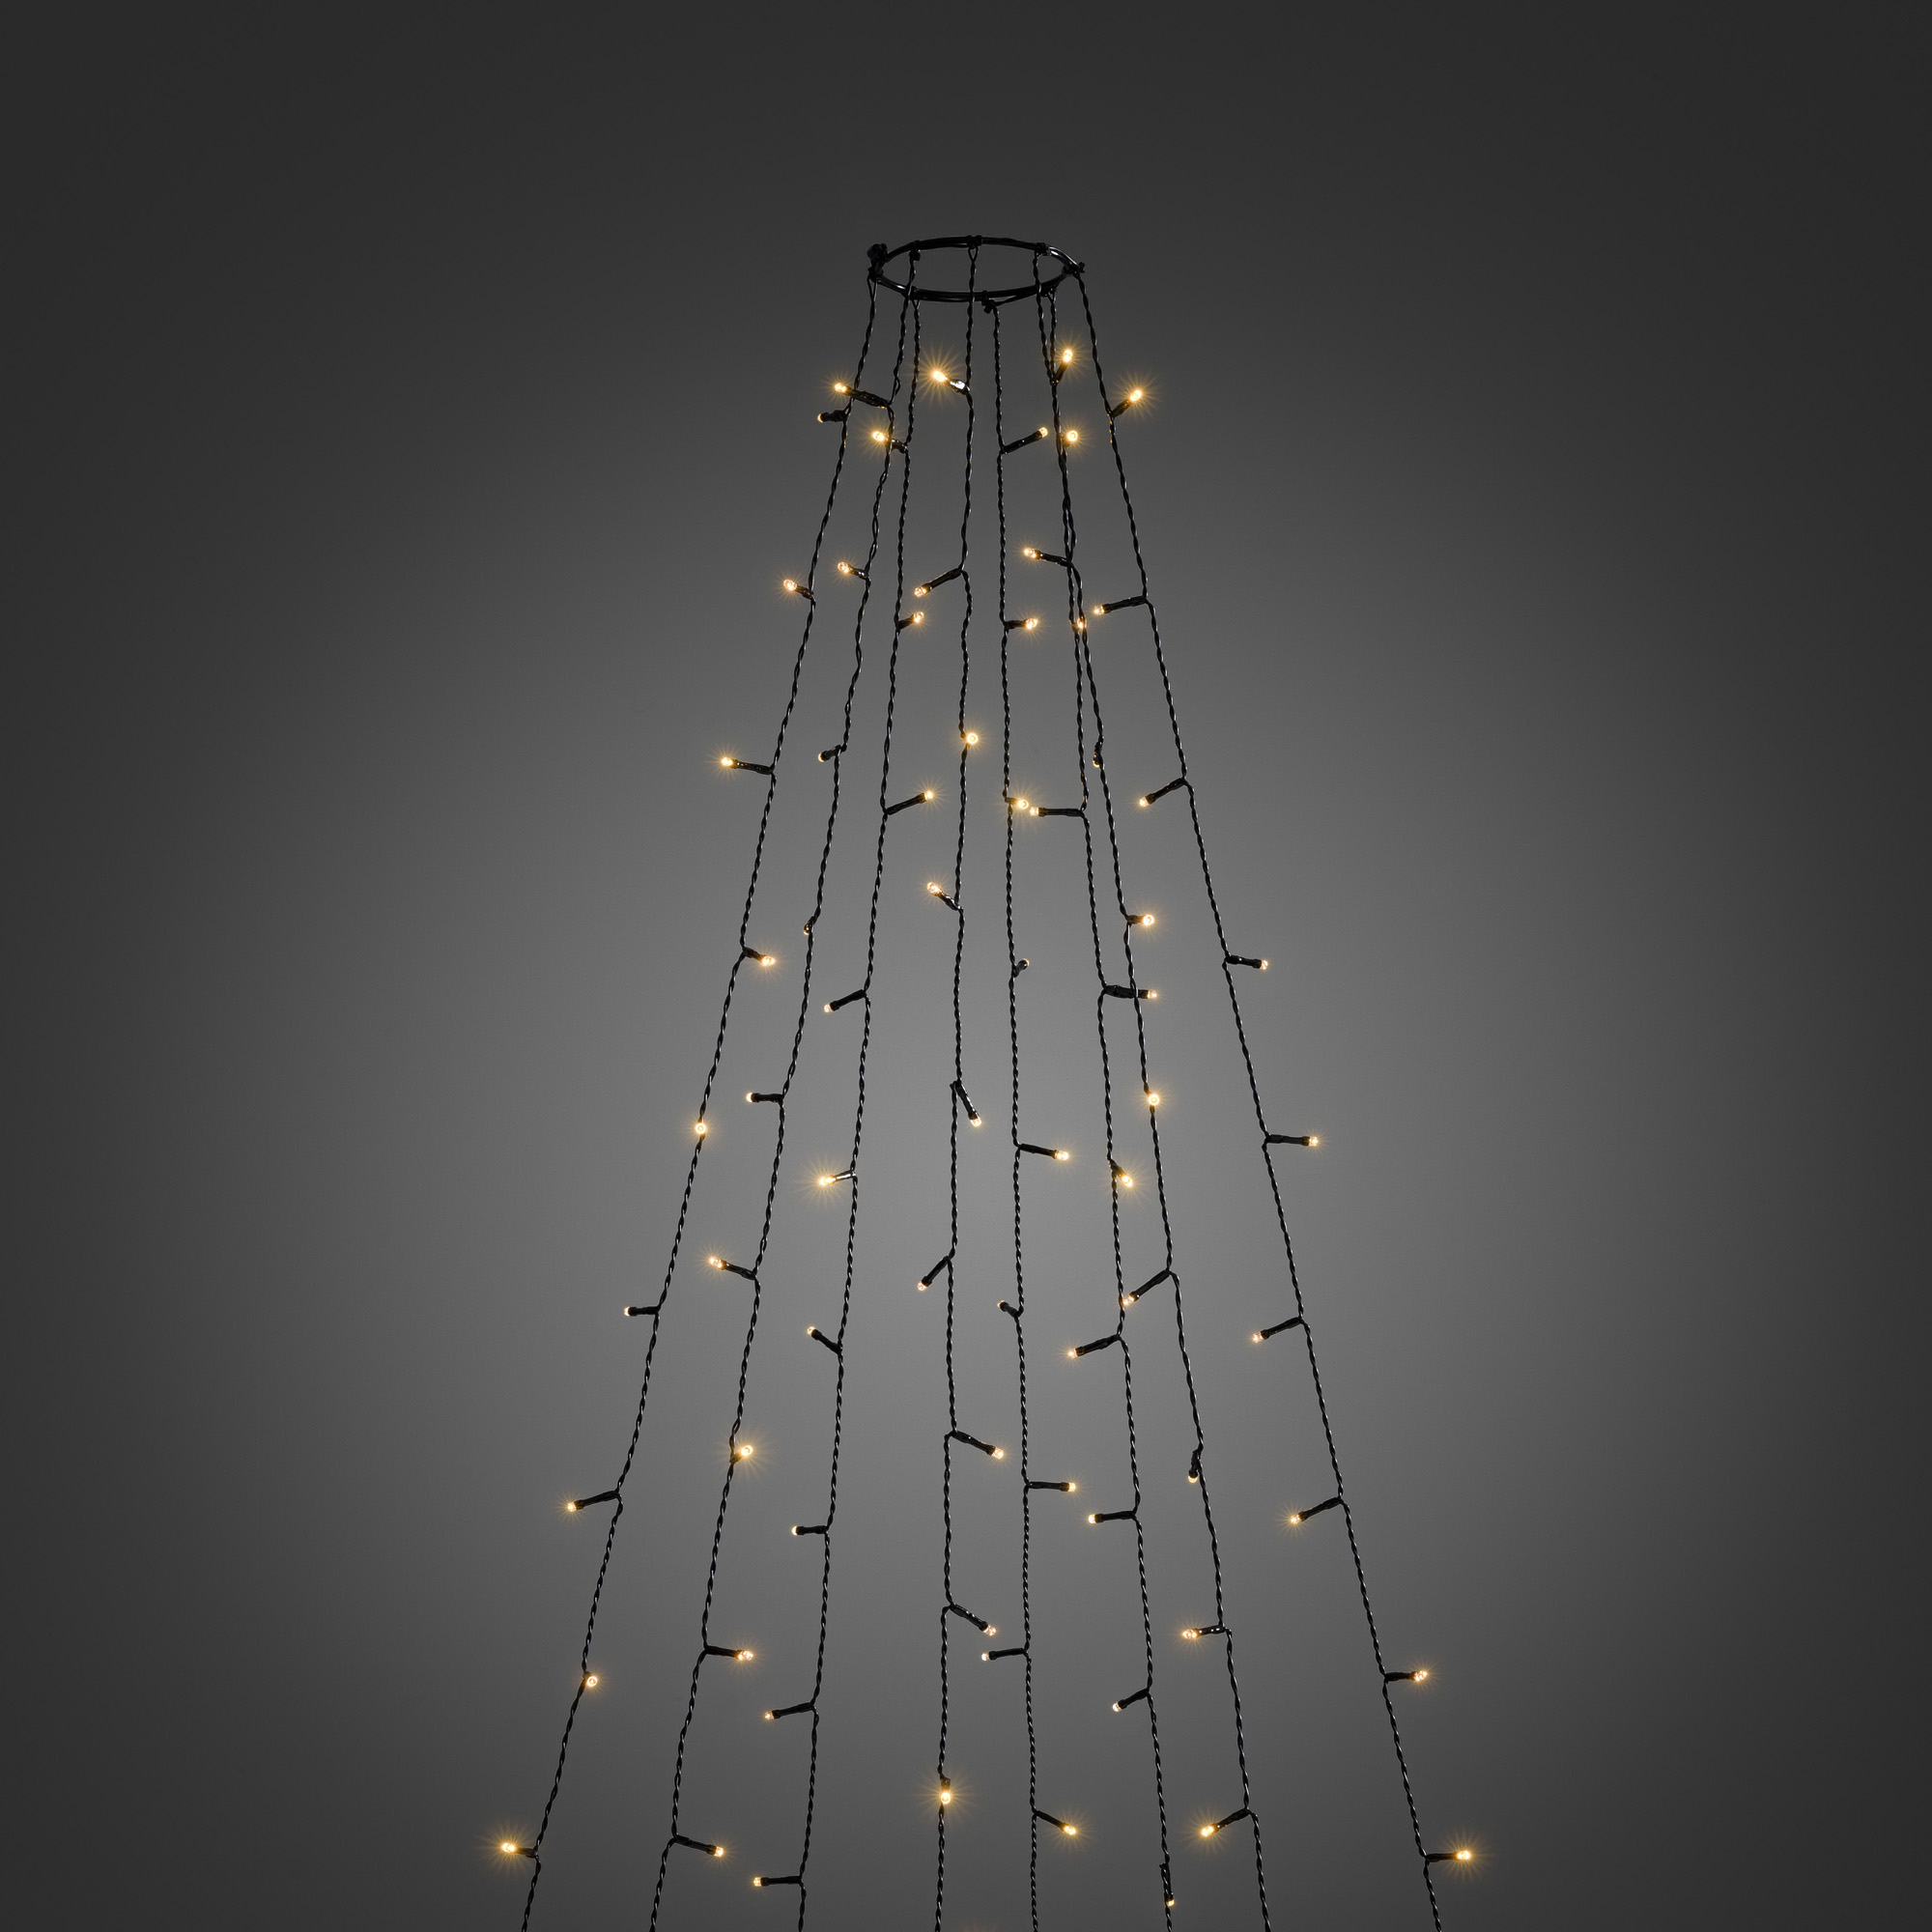 LED Tree Coat amber, 8 strings of 5.6m (70LEDs each), with multifunction, app-controlled